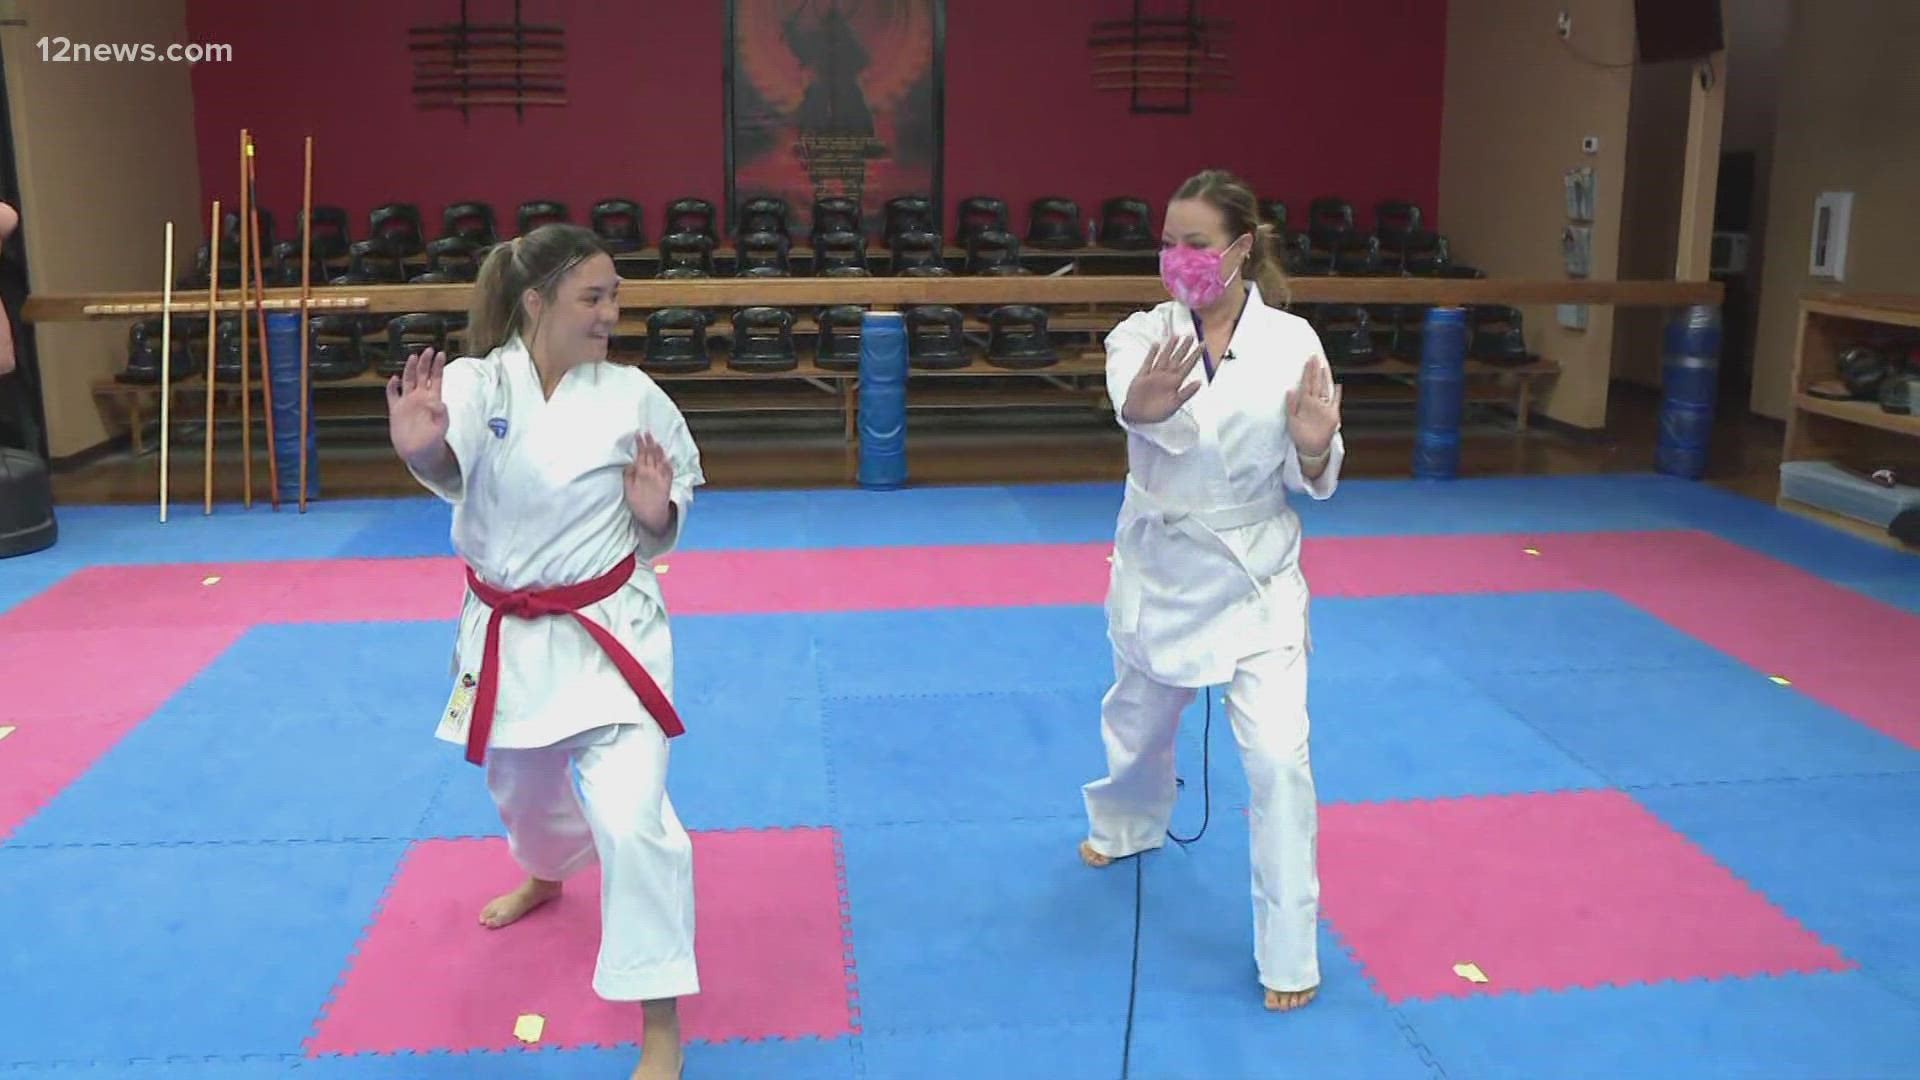 Did you know karate is now an official Olympic sport? Jen Wahl tries it out and shows us more about the sport.